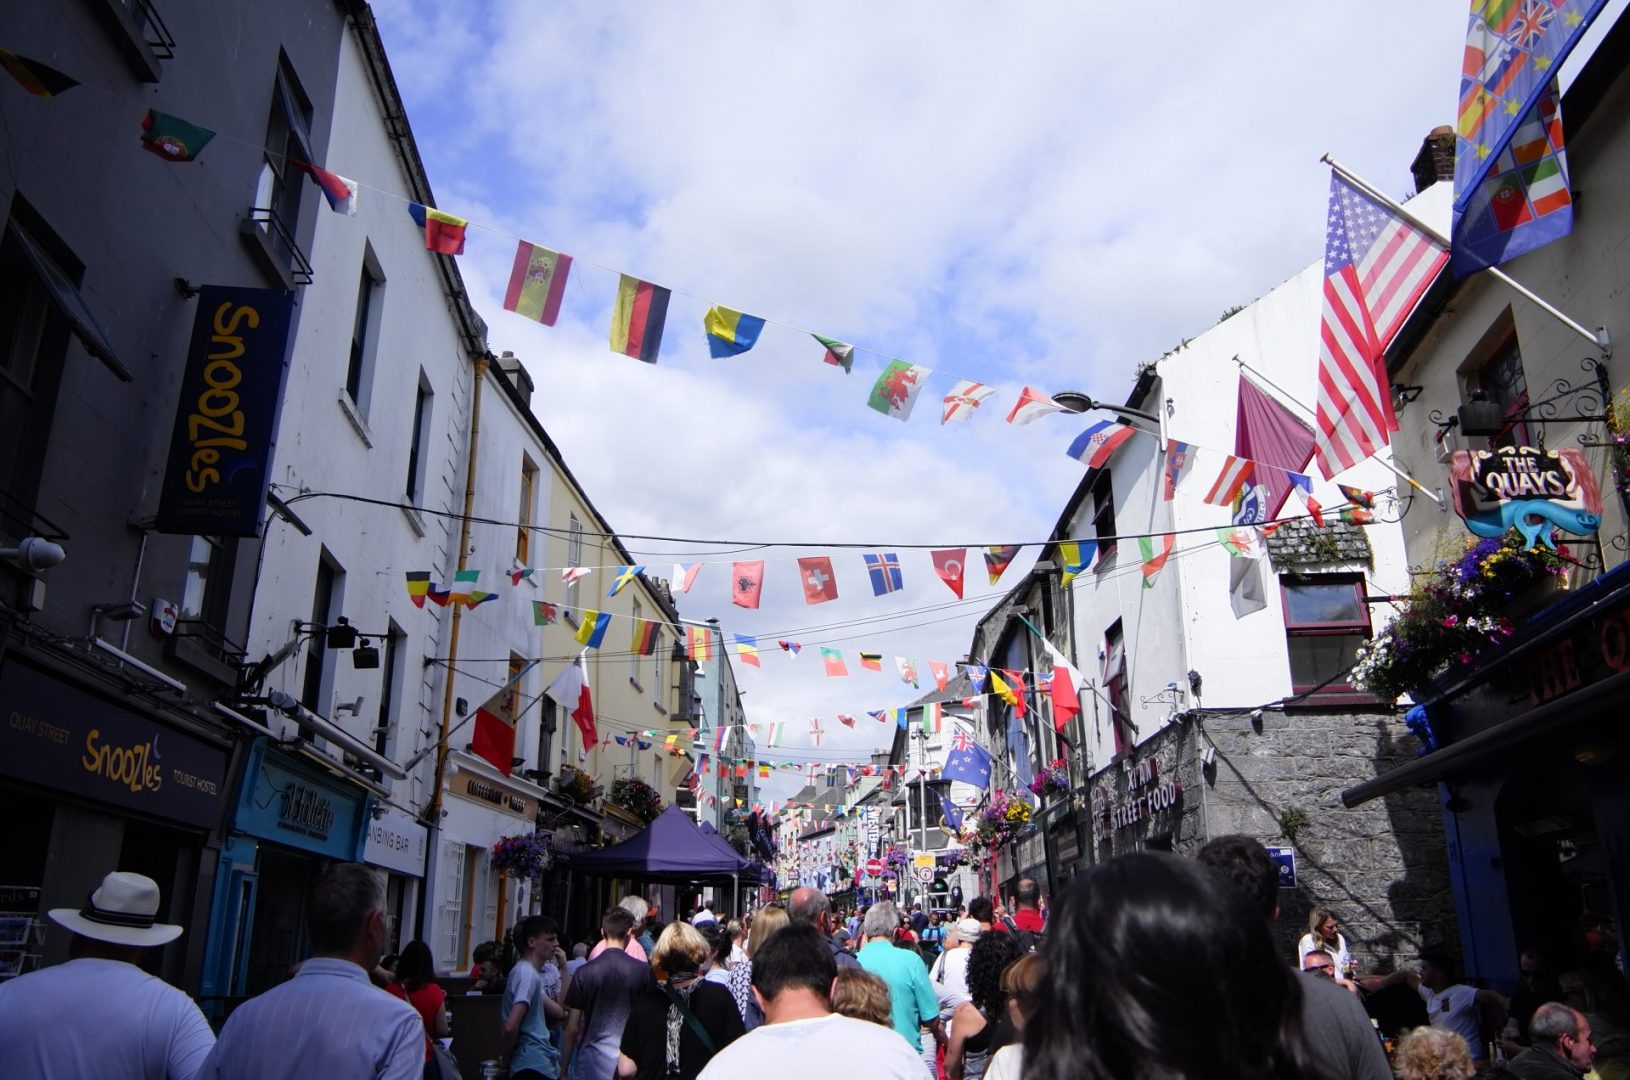 galway city